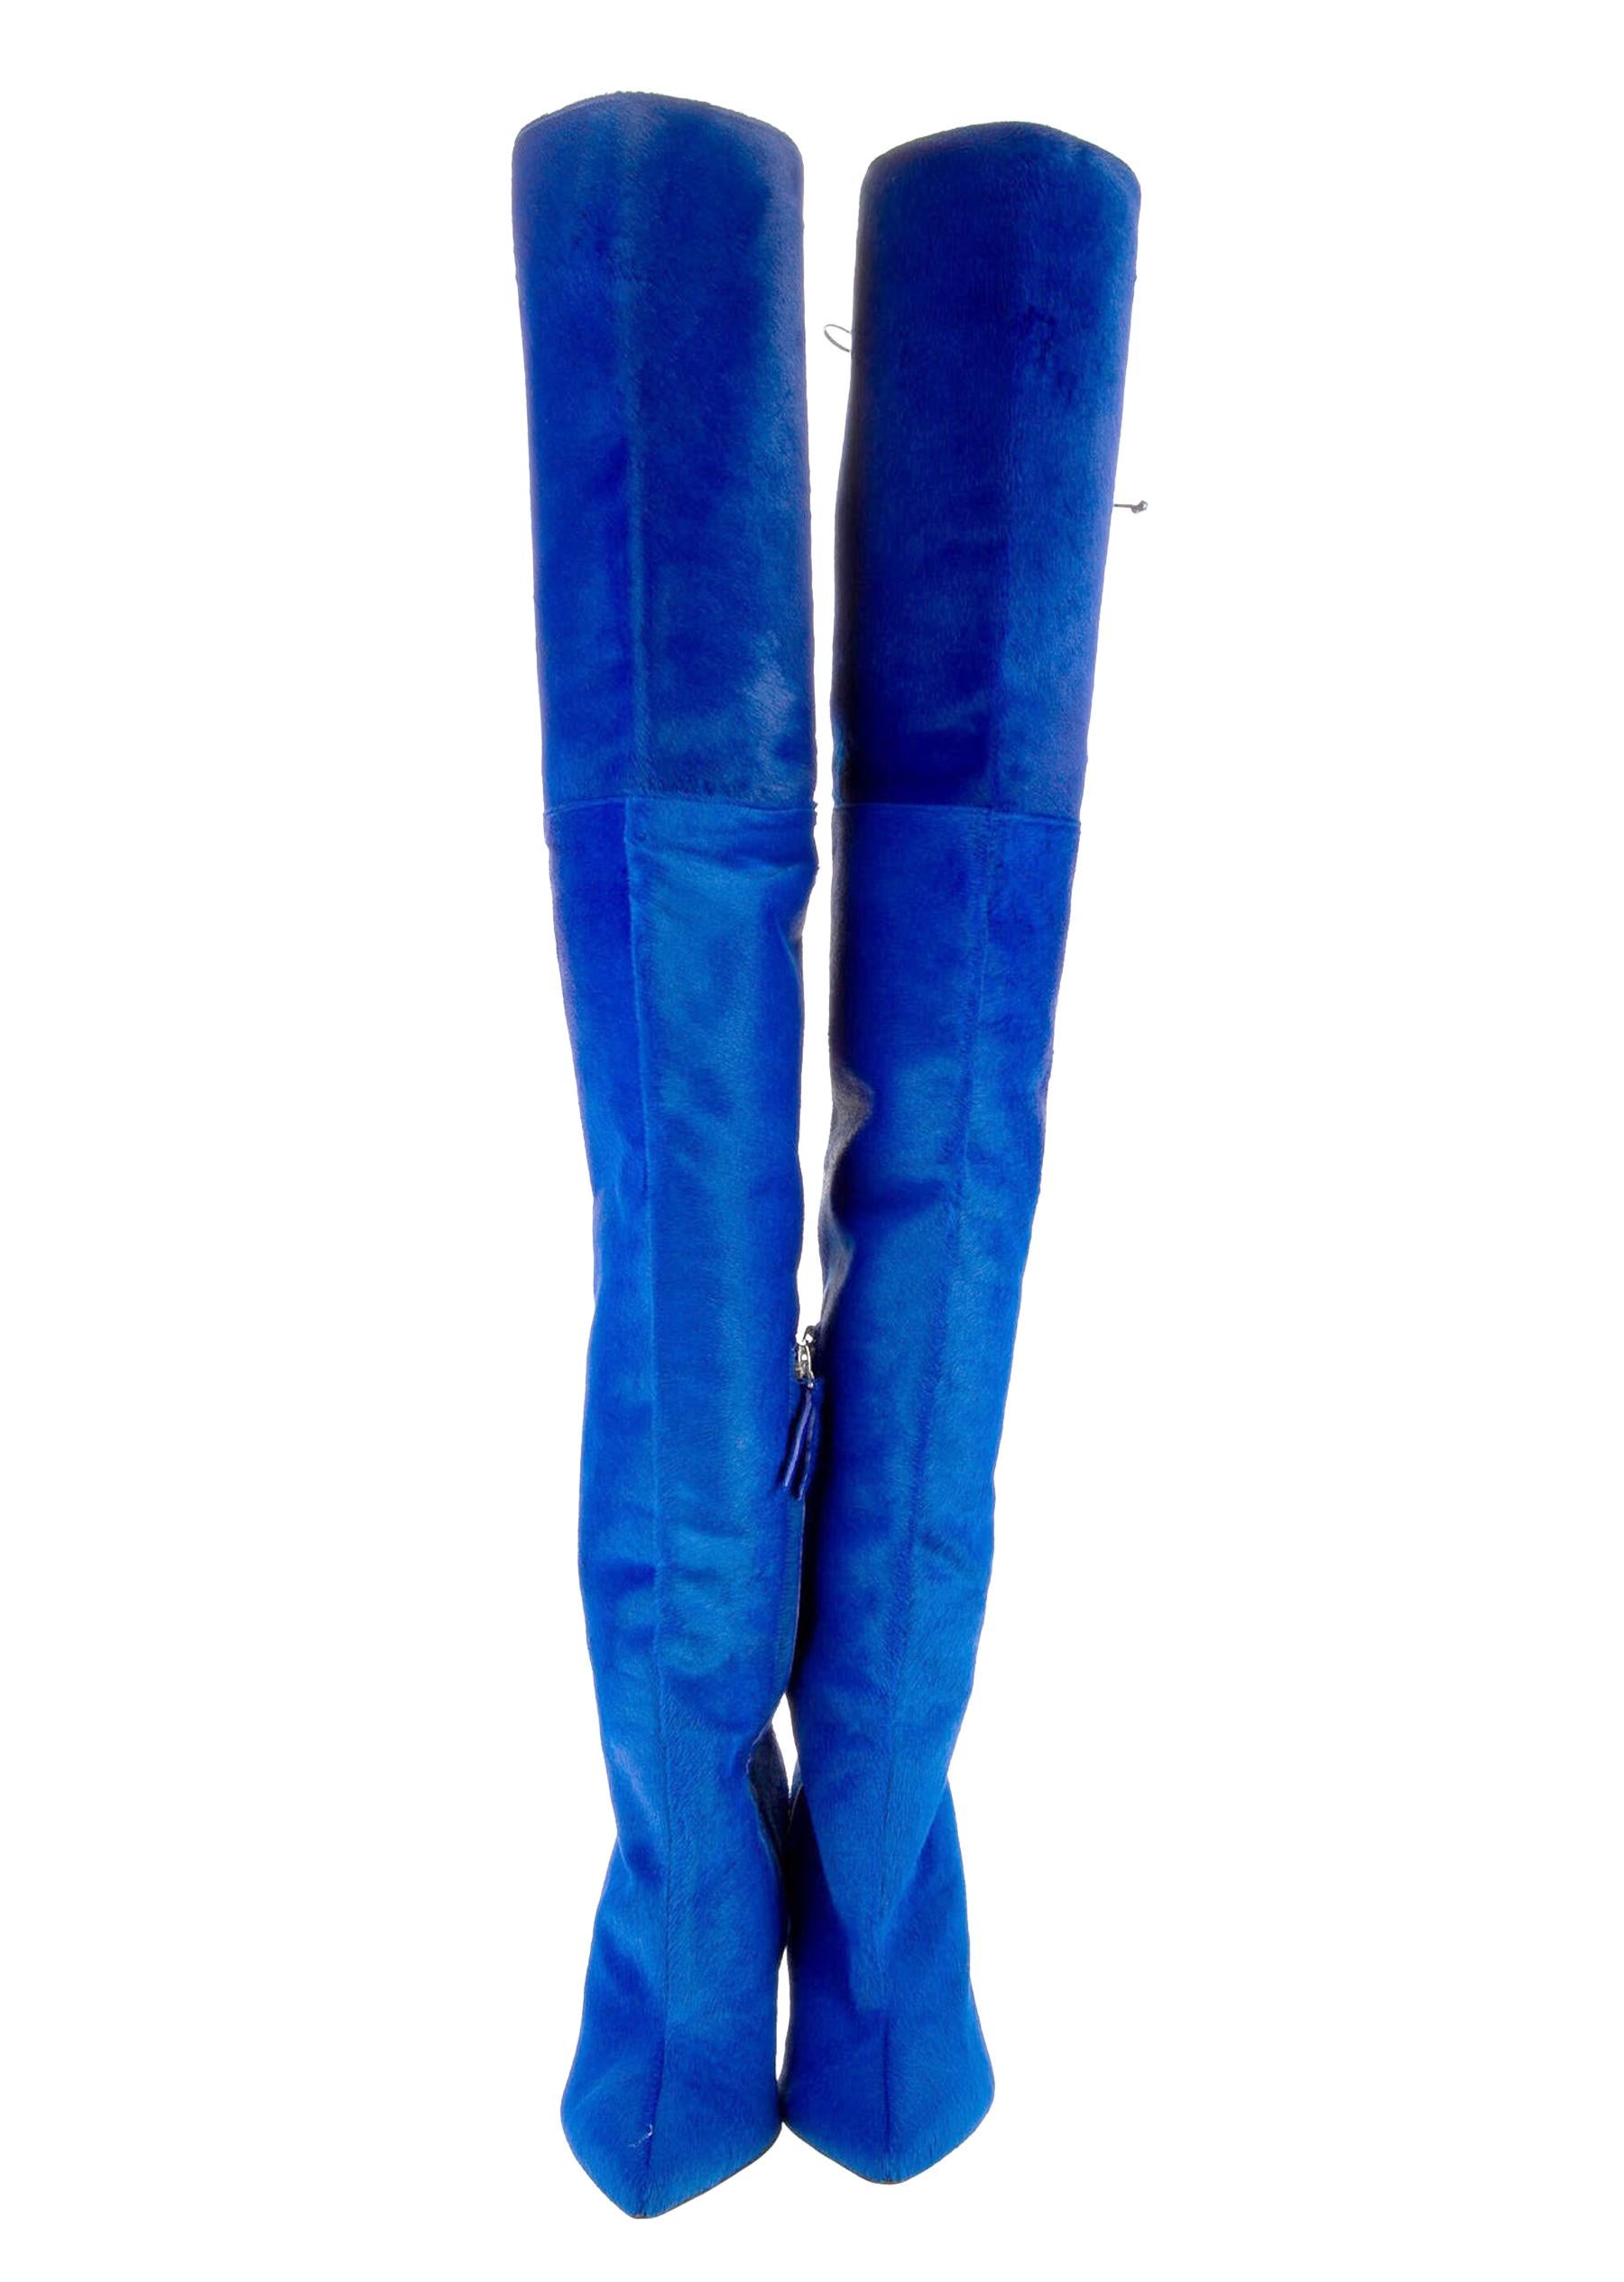 New Oscar De La Renta Blue Over the Knee Boots
F/W 2017 Runway Collection
Designer size 38 - US 8
Calf Hair, Lace-Up Adjustable Top with Leather Cord, Fully Lined in Blue Color Leather, Partly Zip Closure.
Height - 30 inches (76 cm ), Stiletto Heel